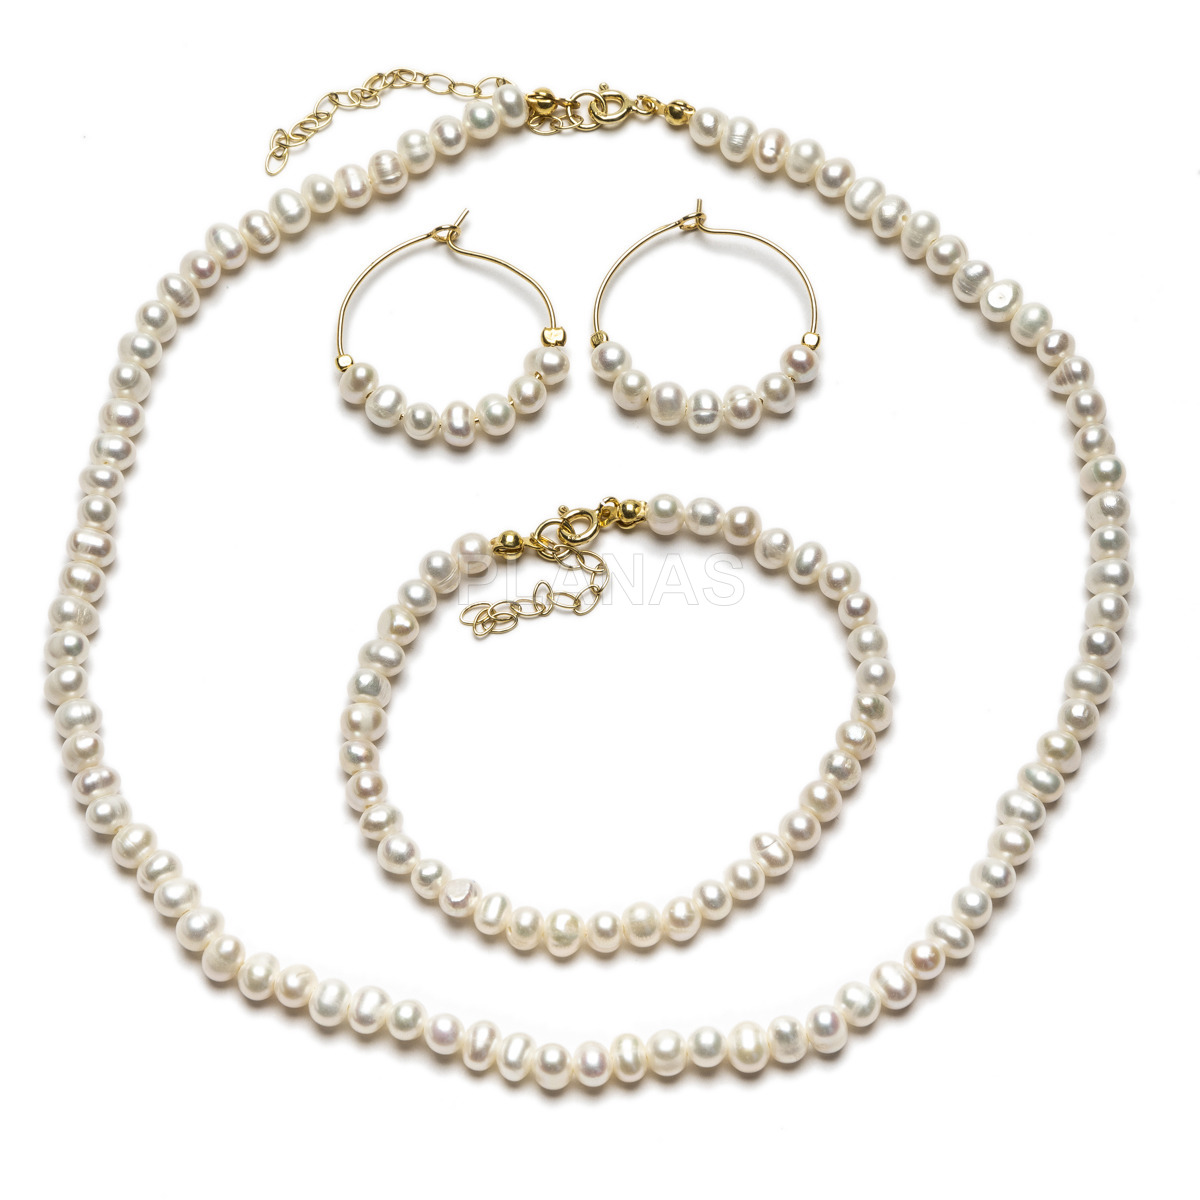 Set of necklace, bracelet and earrings in sterling silver and gold plated with cultured pearl.